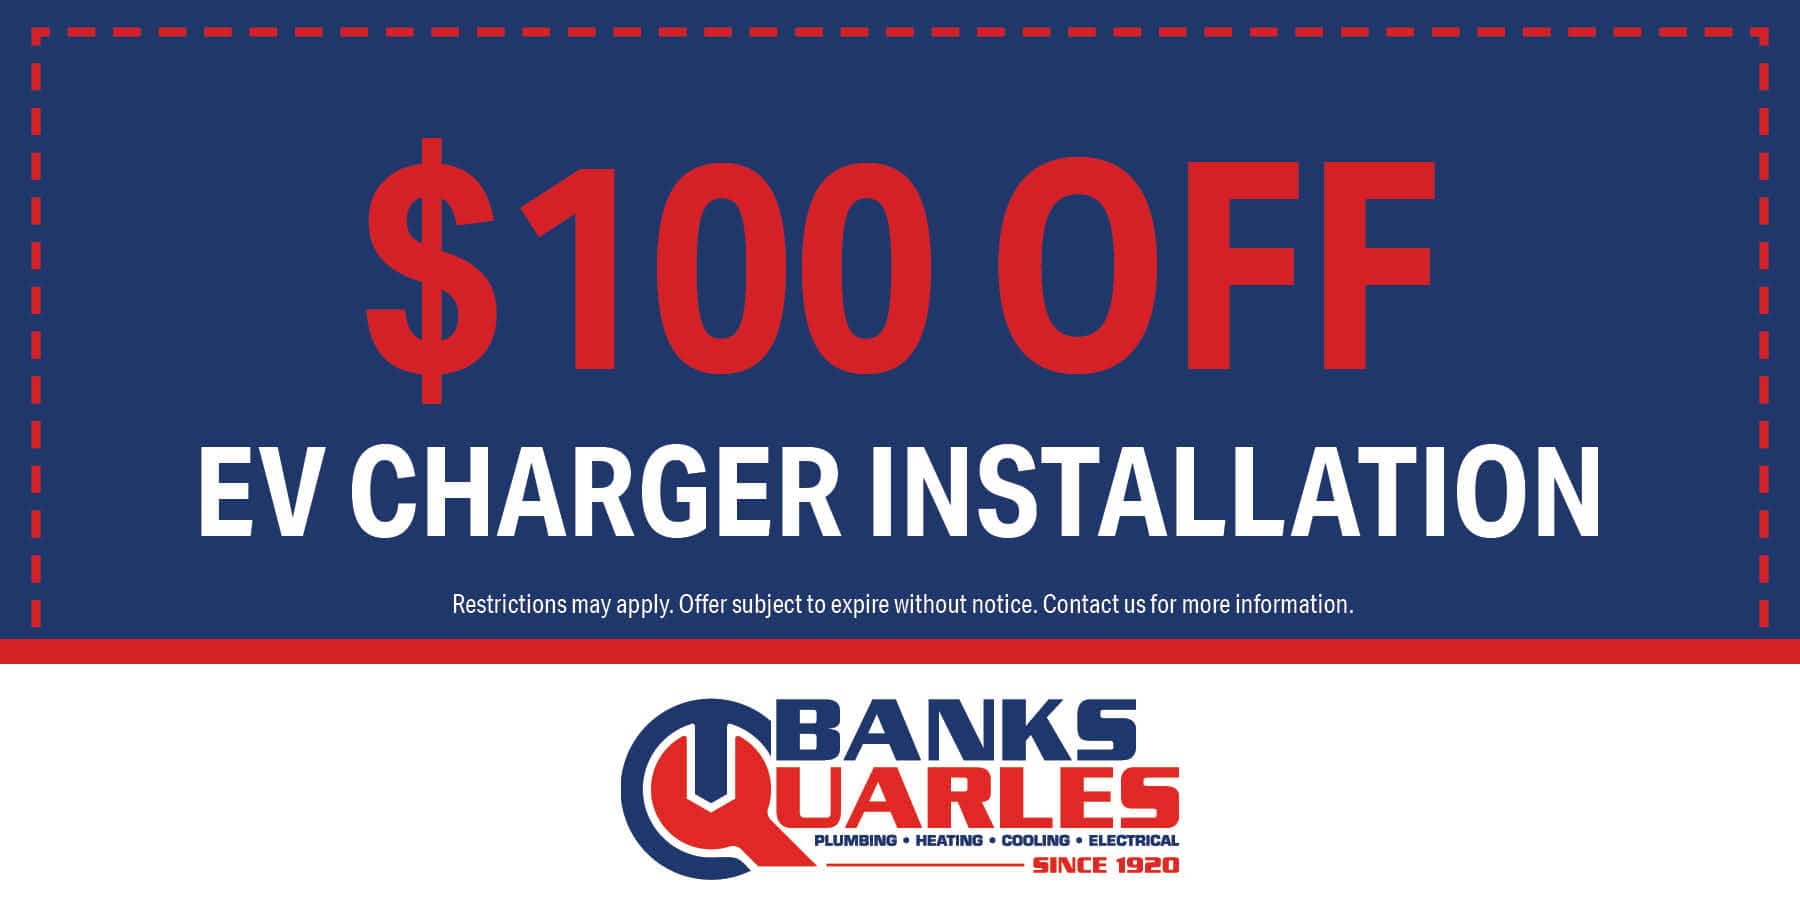 $100 off ev charger installation. Offer subject to expire without warning. Contact us for details.